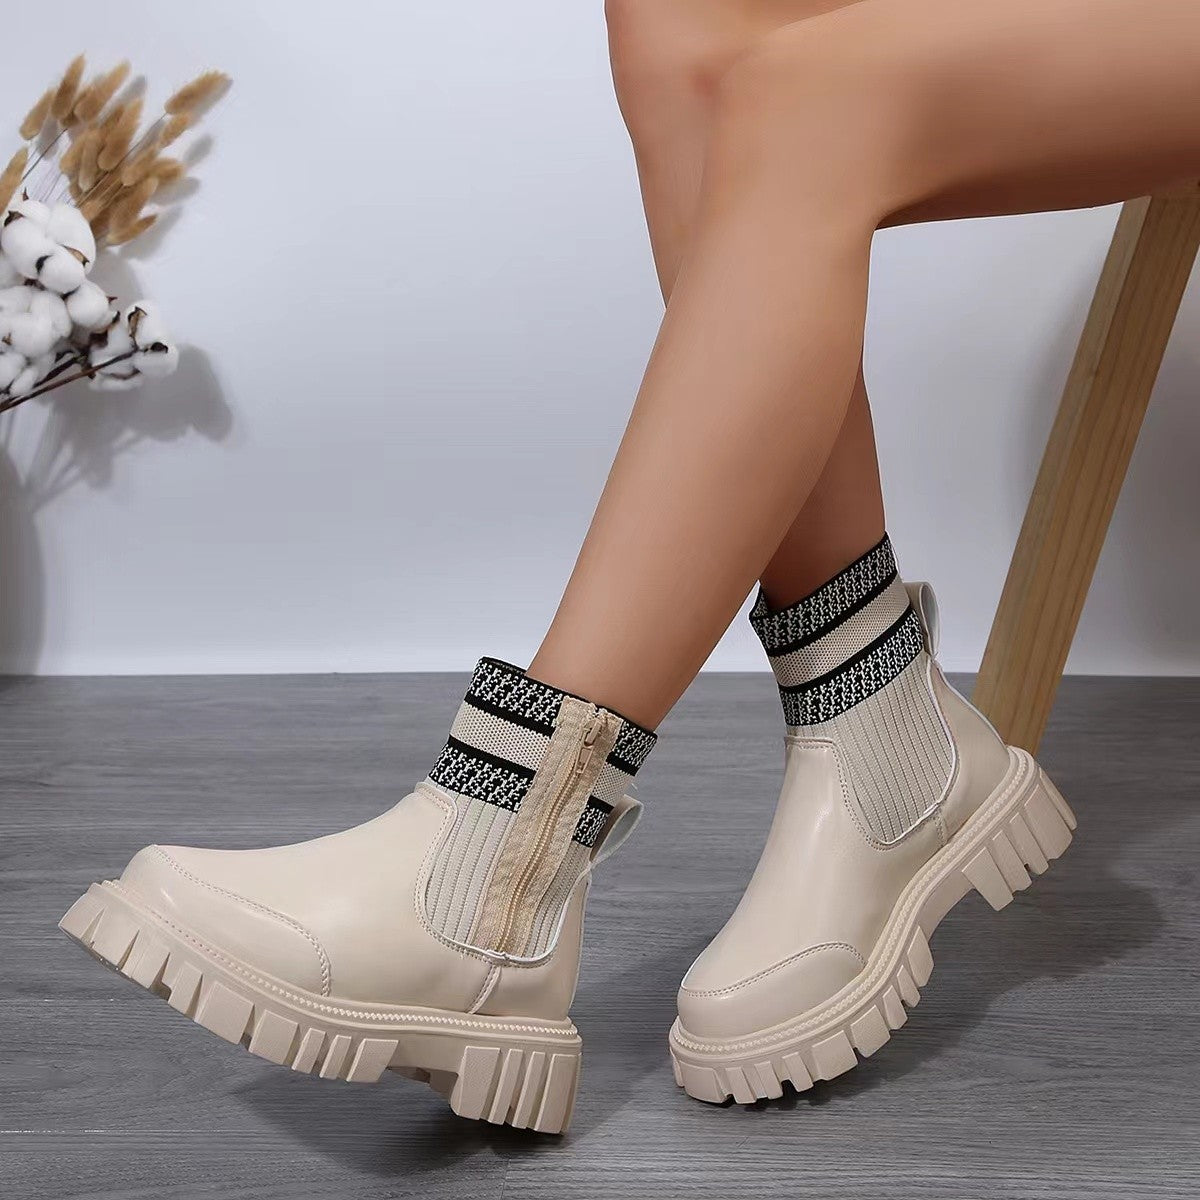 Boots  | Women's Fashionable Women's Middle Boots | Creamy White |  36| thecurvestory.myshopify.com